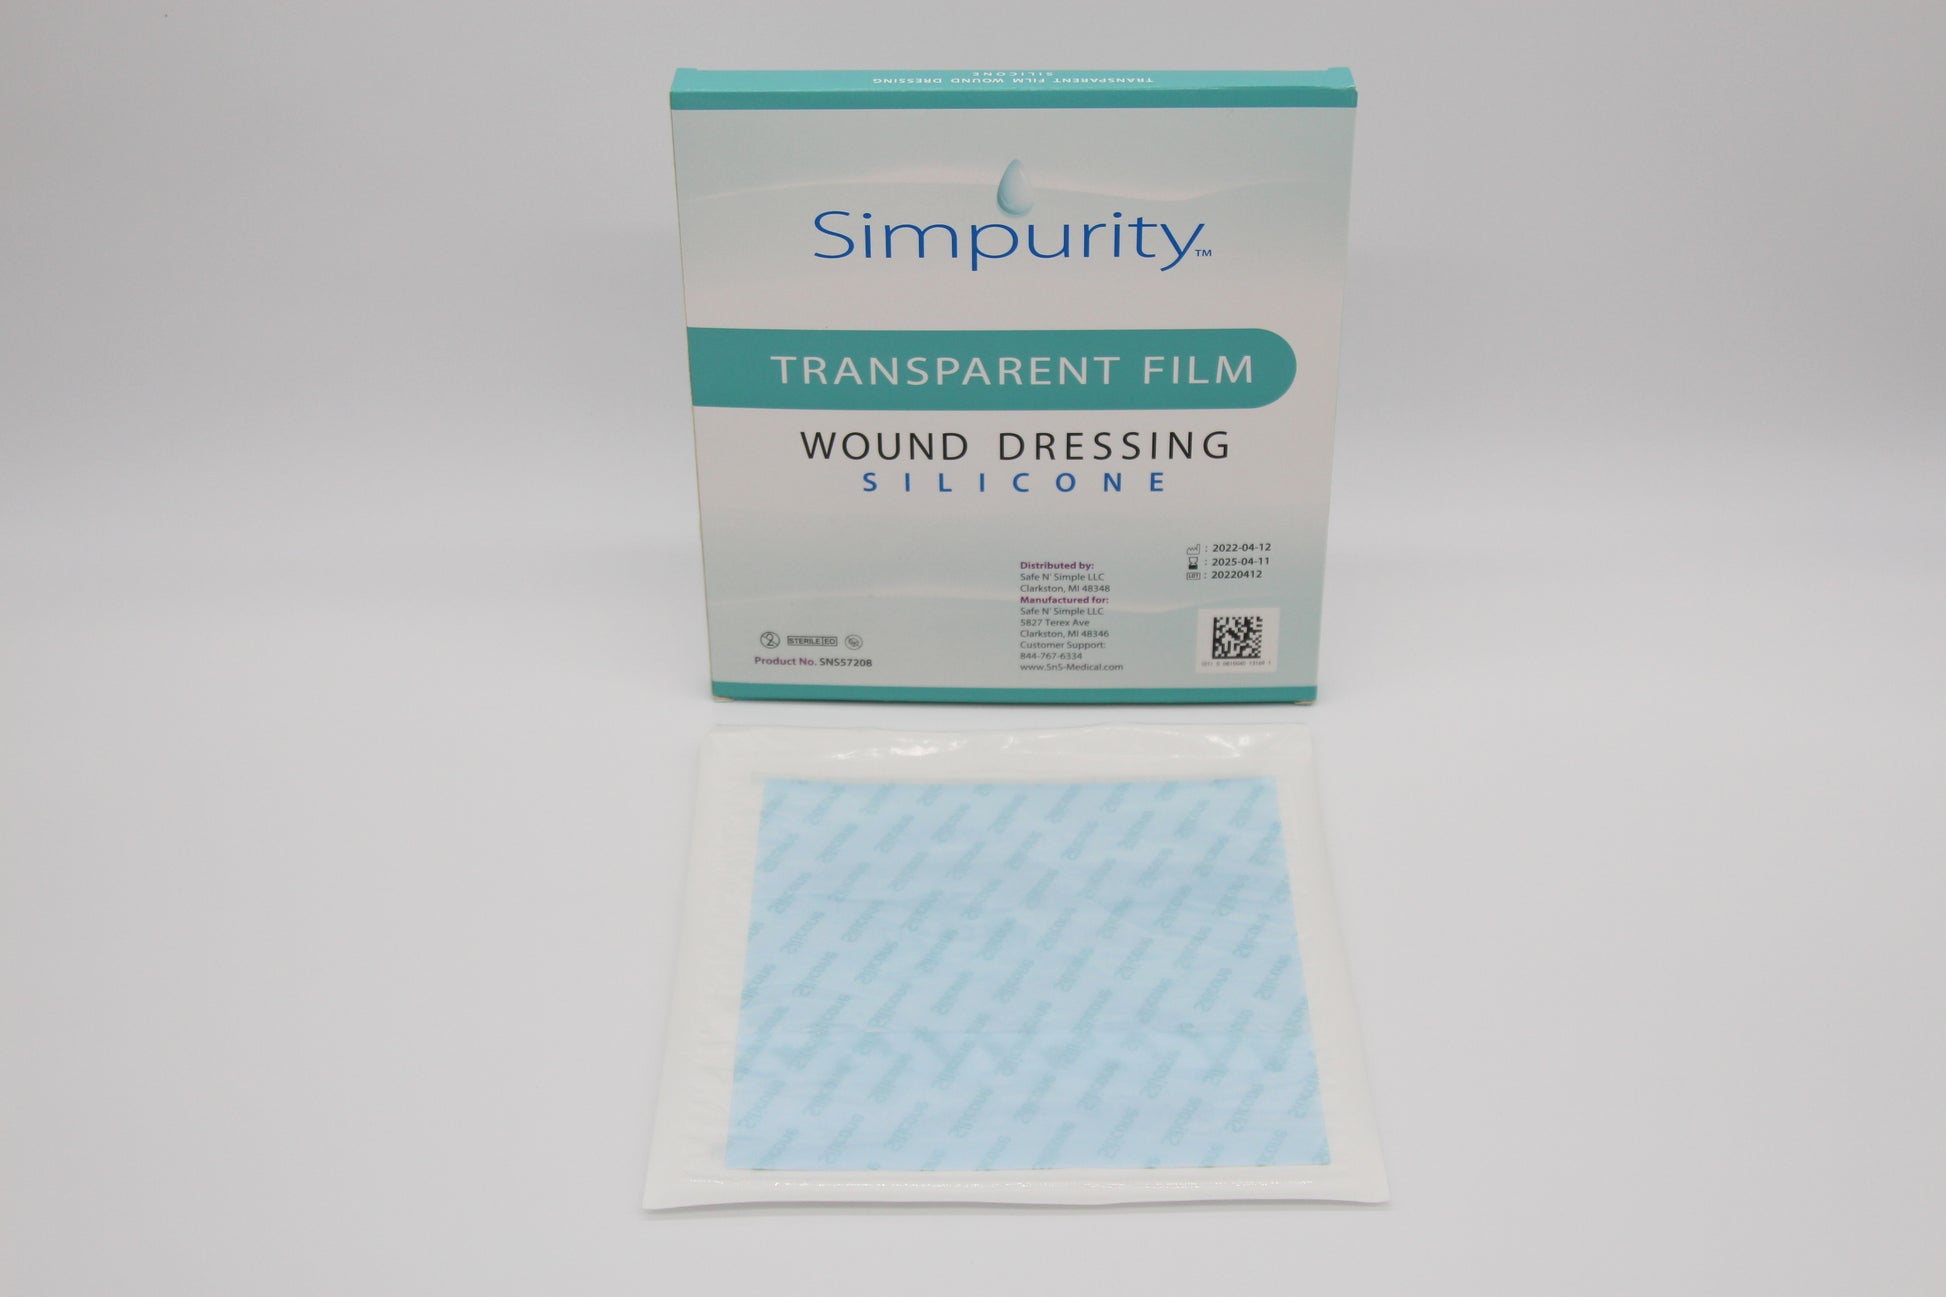 Transparent Silicone Film Dressings | Wound dressing | Wound care dressing | Advanced wound care